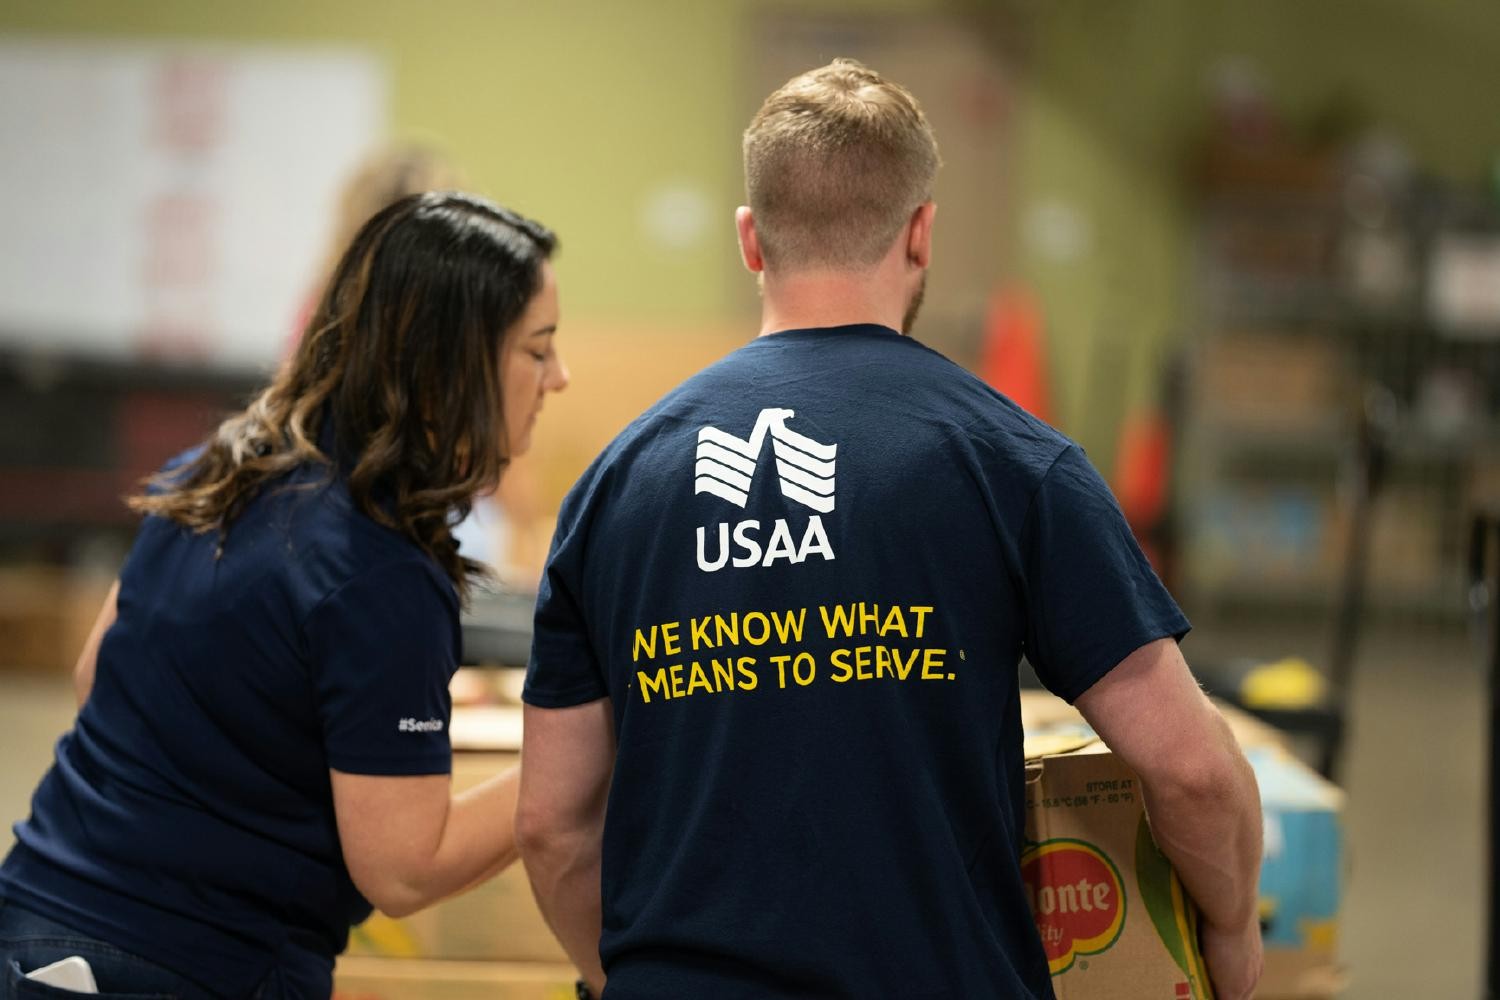 USAA is committed to inspiring change in our local communities.